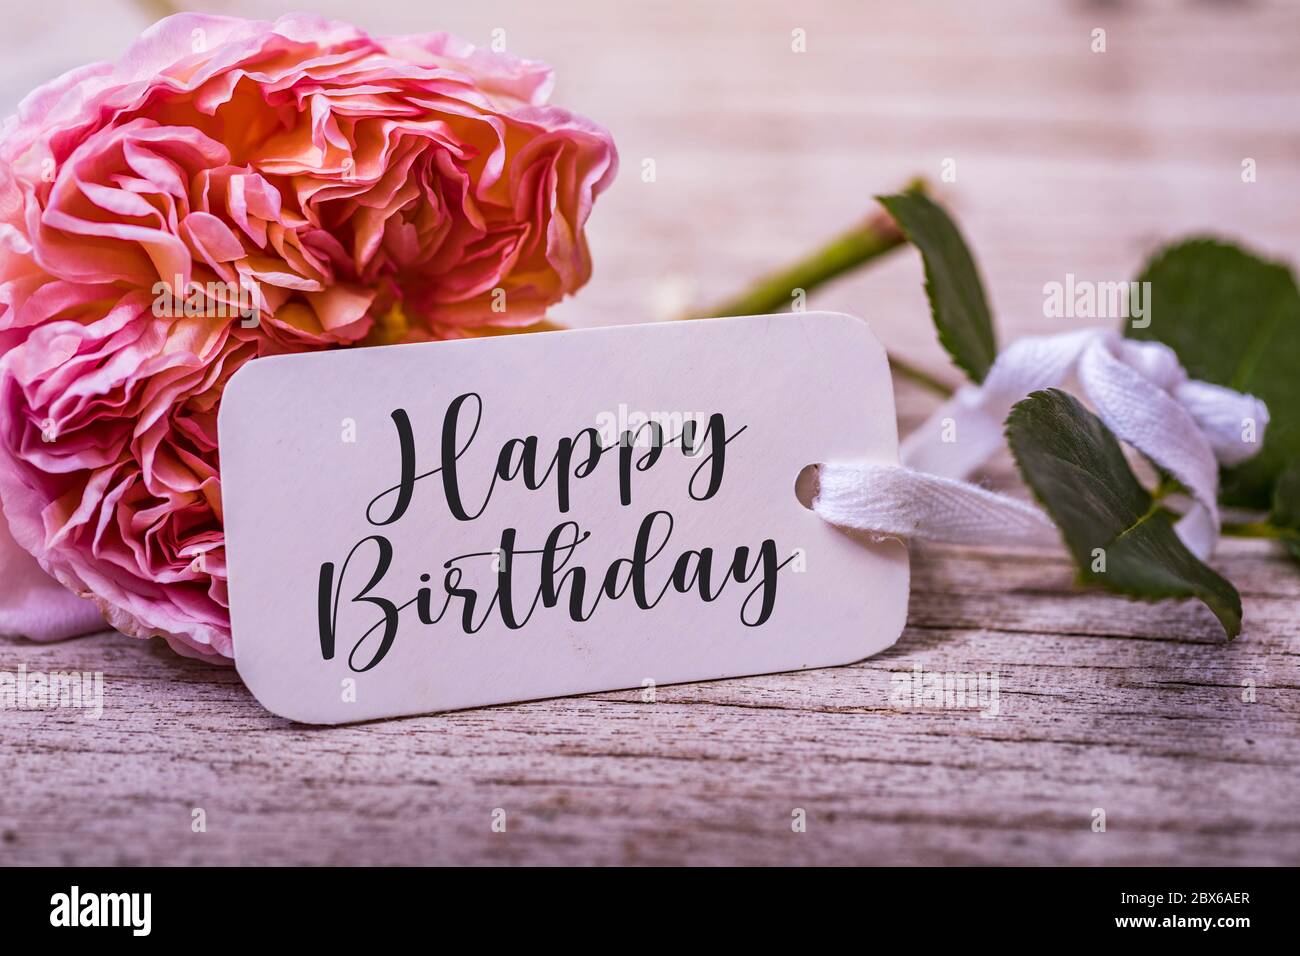 Birthday background with flowers and card. Rose and happy birthday word on  white card. Pastel colors on selective focus image Stock Photo - Alamy